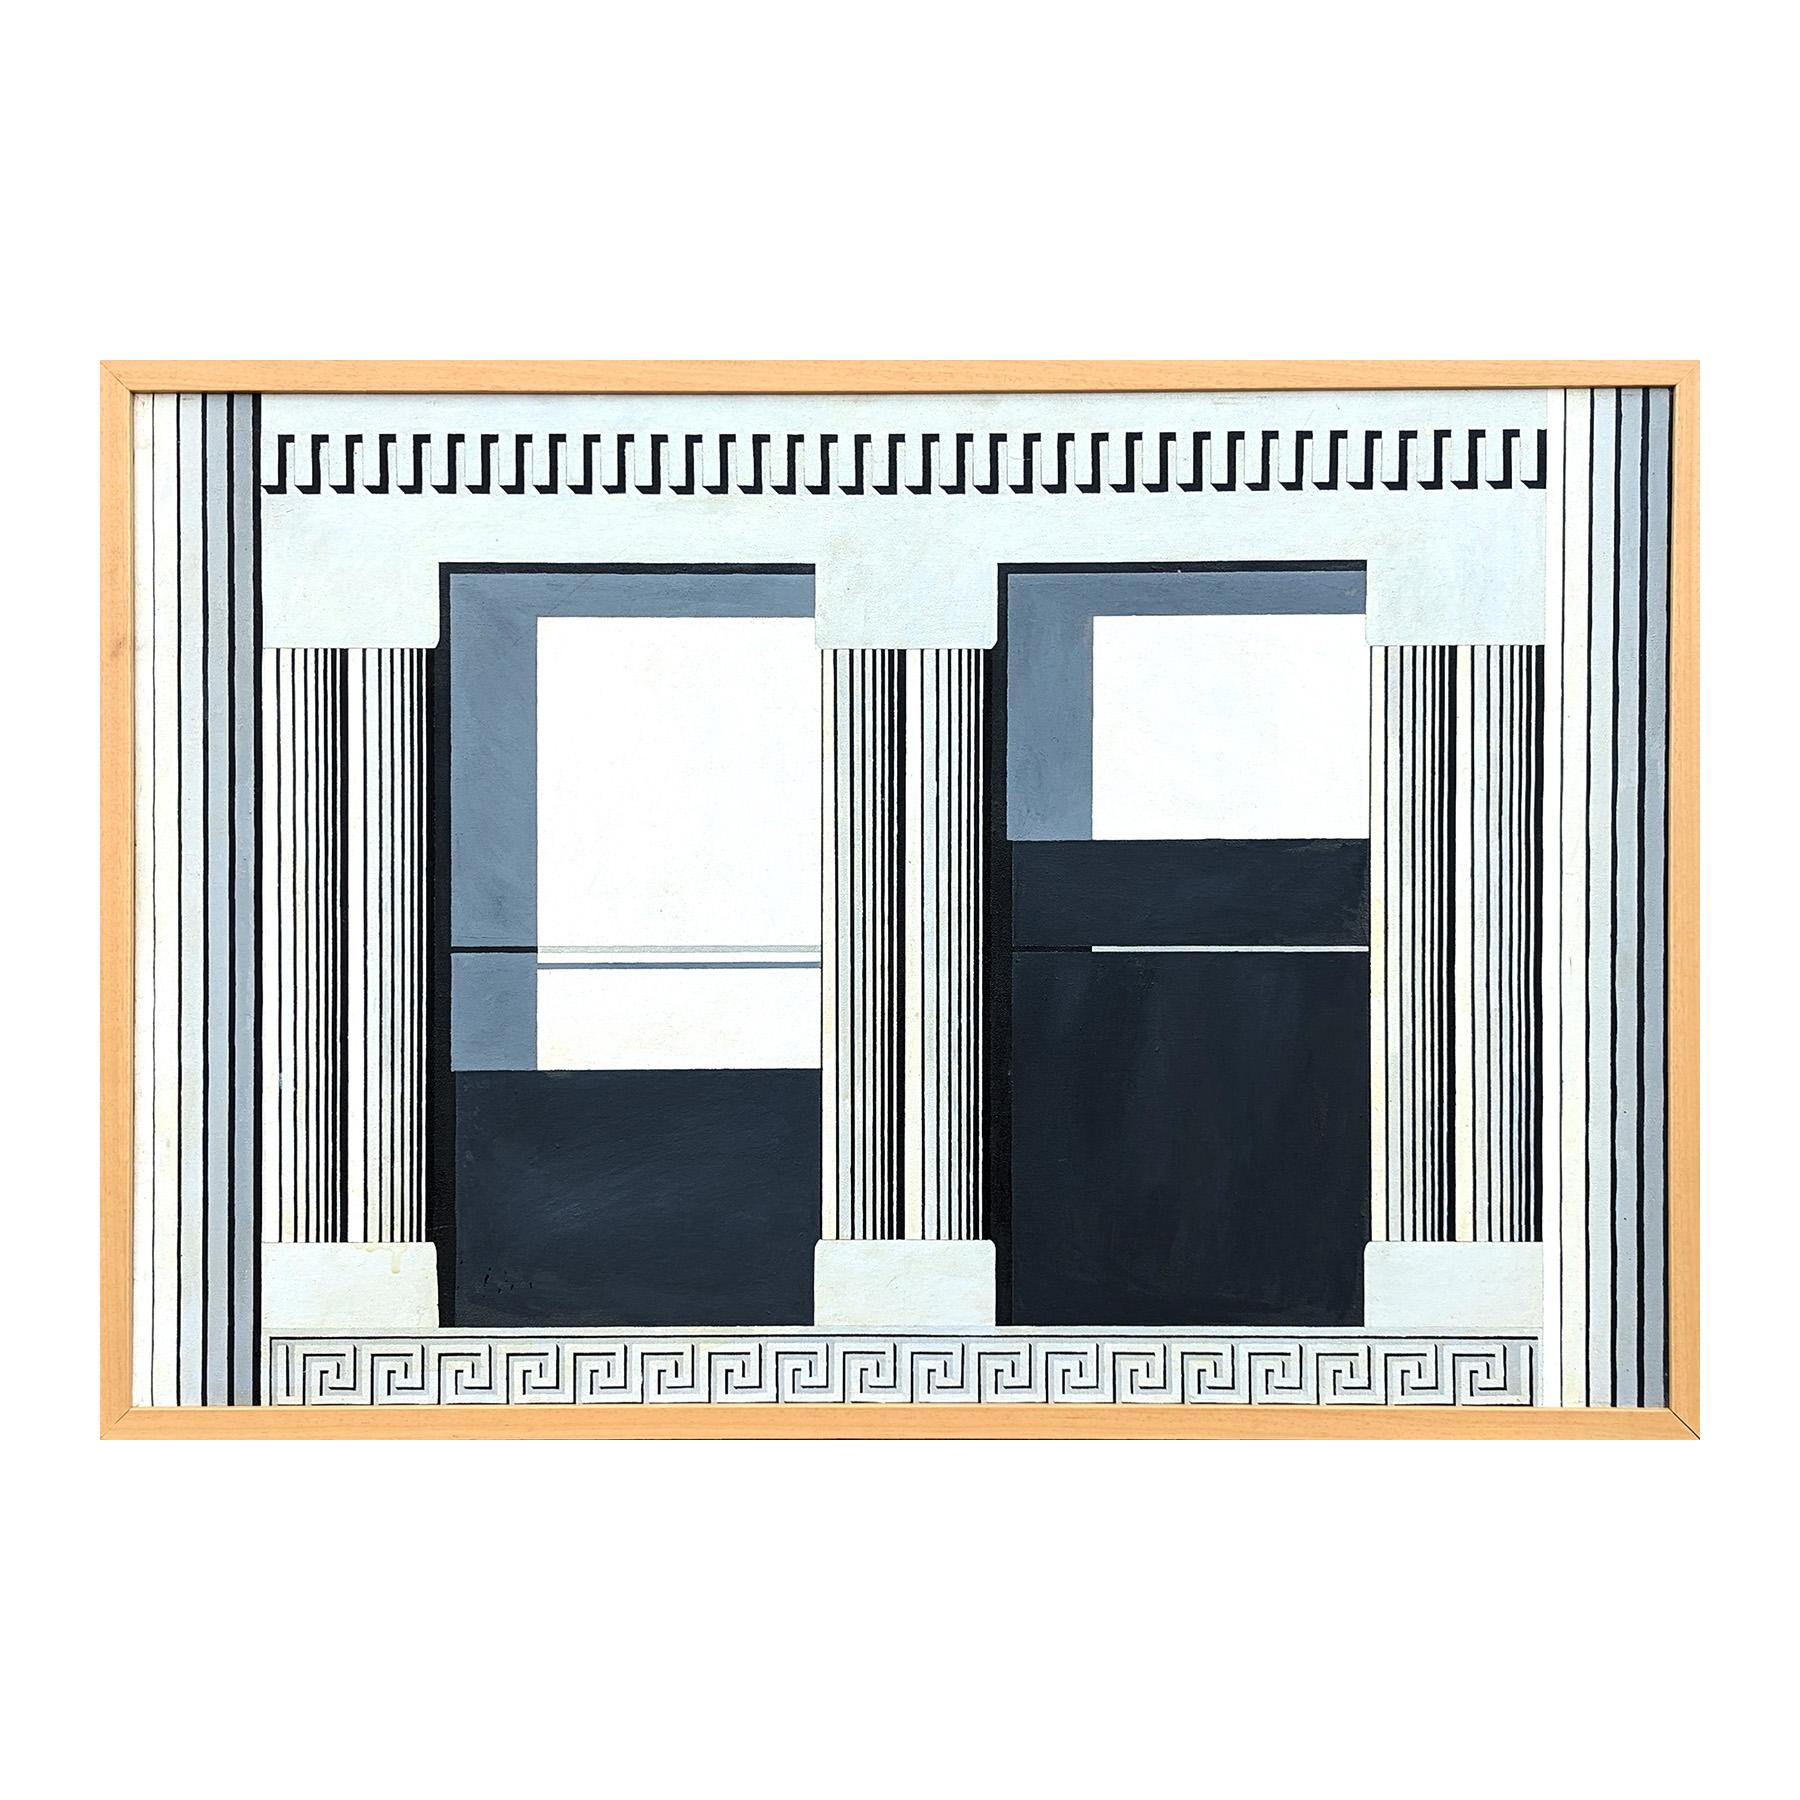 Modern grey and black toned landscape painting by Texas born artist Clark Fox. The work features a clean-lined, geometric rendering of an architectural façade in shadow. Currently hung in a light wood floating frame. 

Dimensions Without Frame: H 24